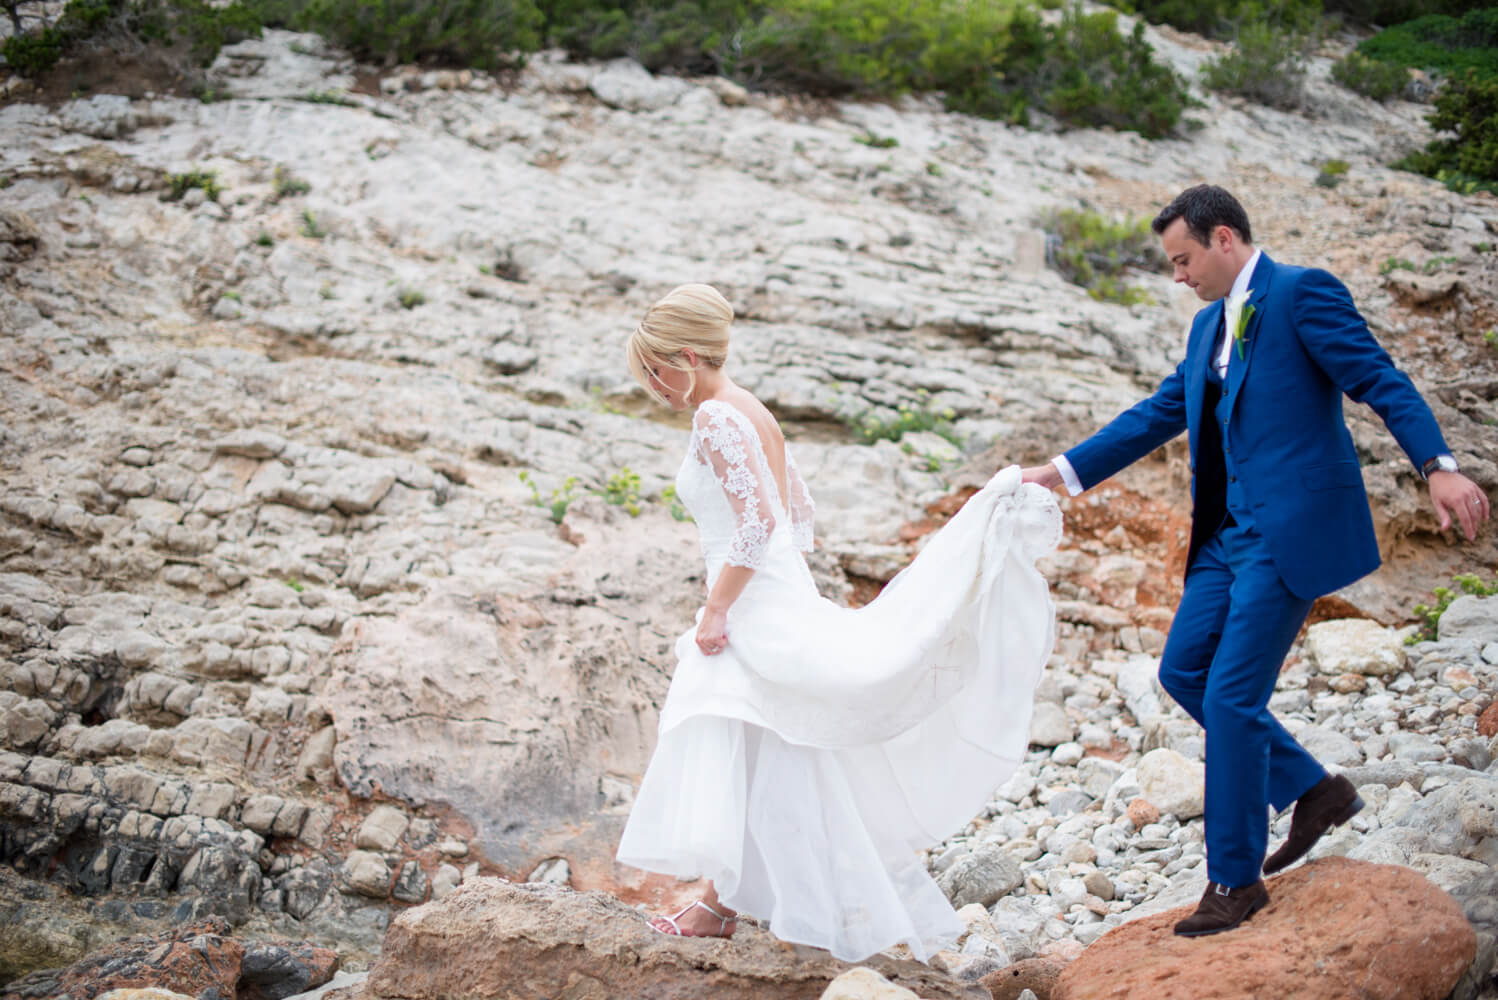 Groom holding up his bride's veil while walking across the rocks at their Ibiza wedding